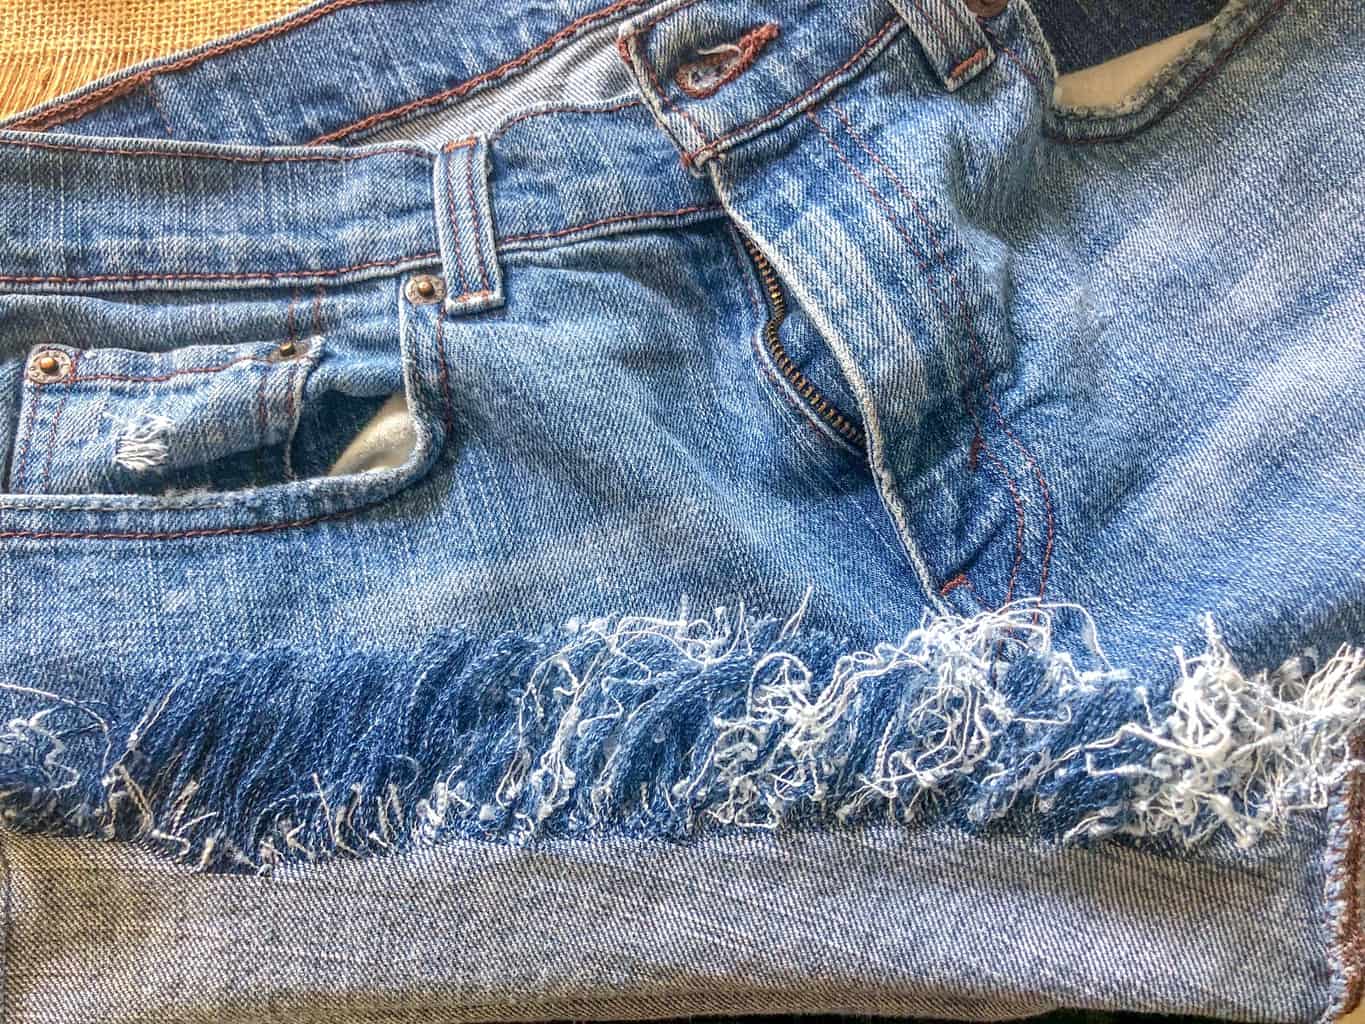 DIY Denim Shorts | Thrifted Jeans Into Shorts | Thrifted & Taylor'd